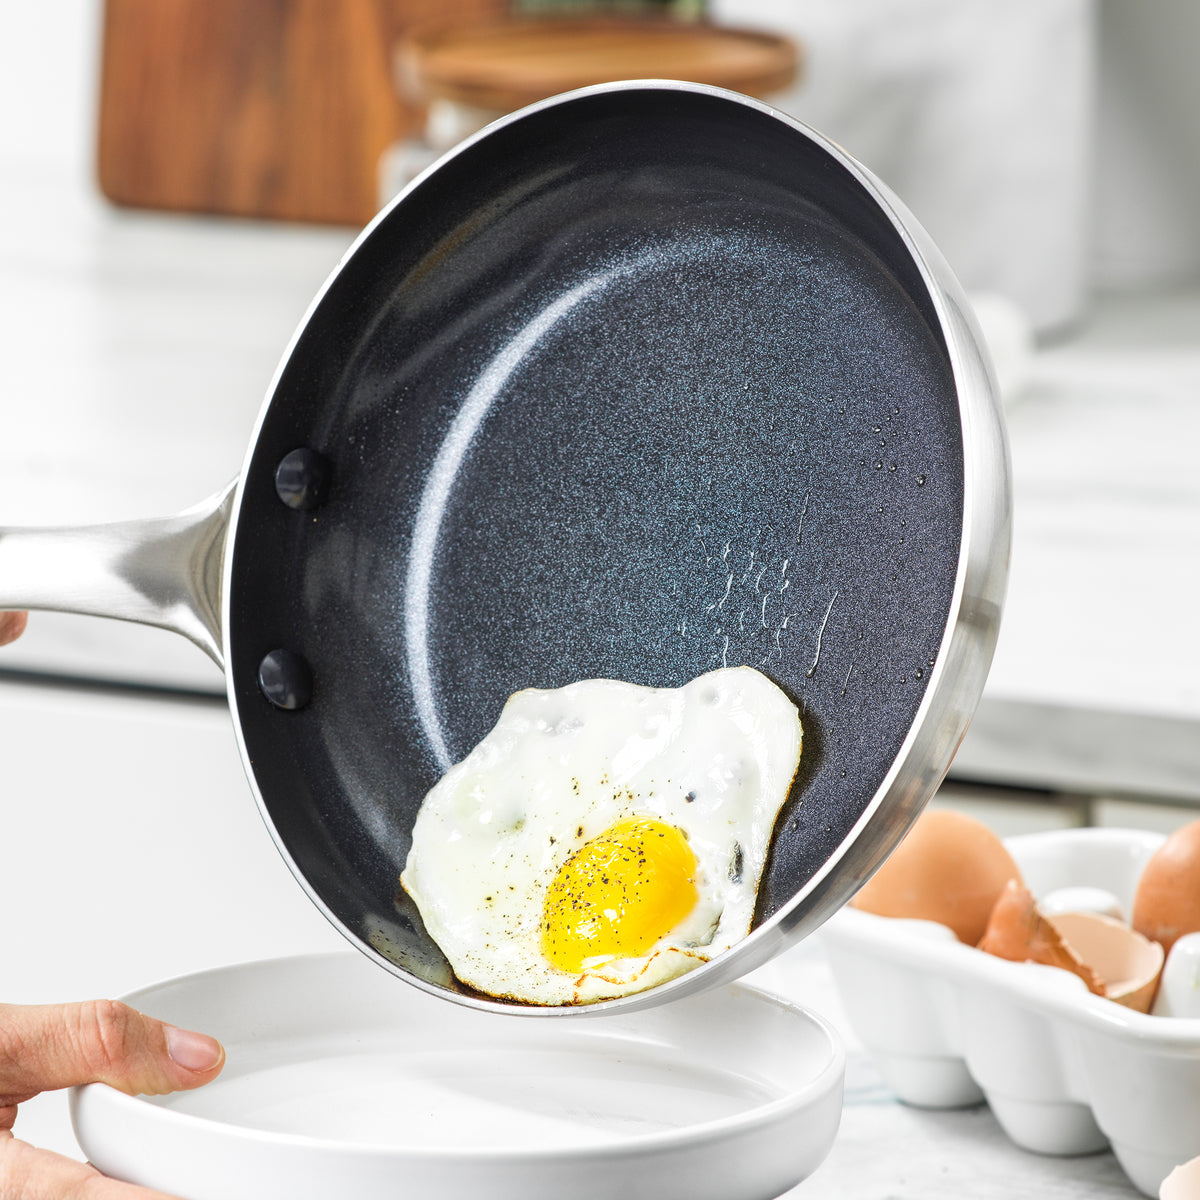 Nontoxic Nonstick Cookware: Chemical-Free, Mess-Free Pots and Pans